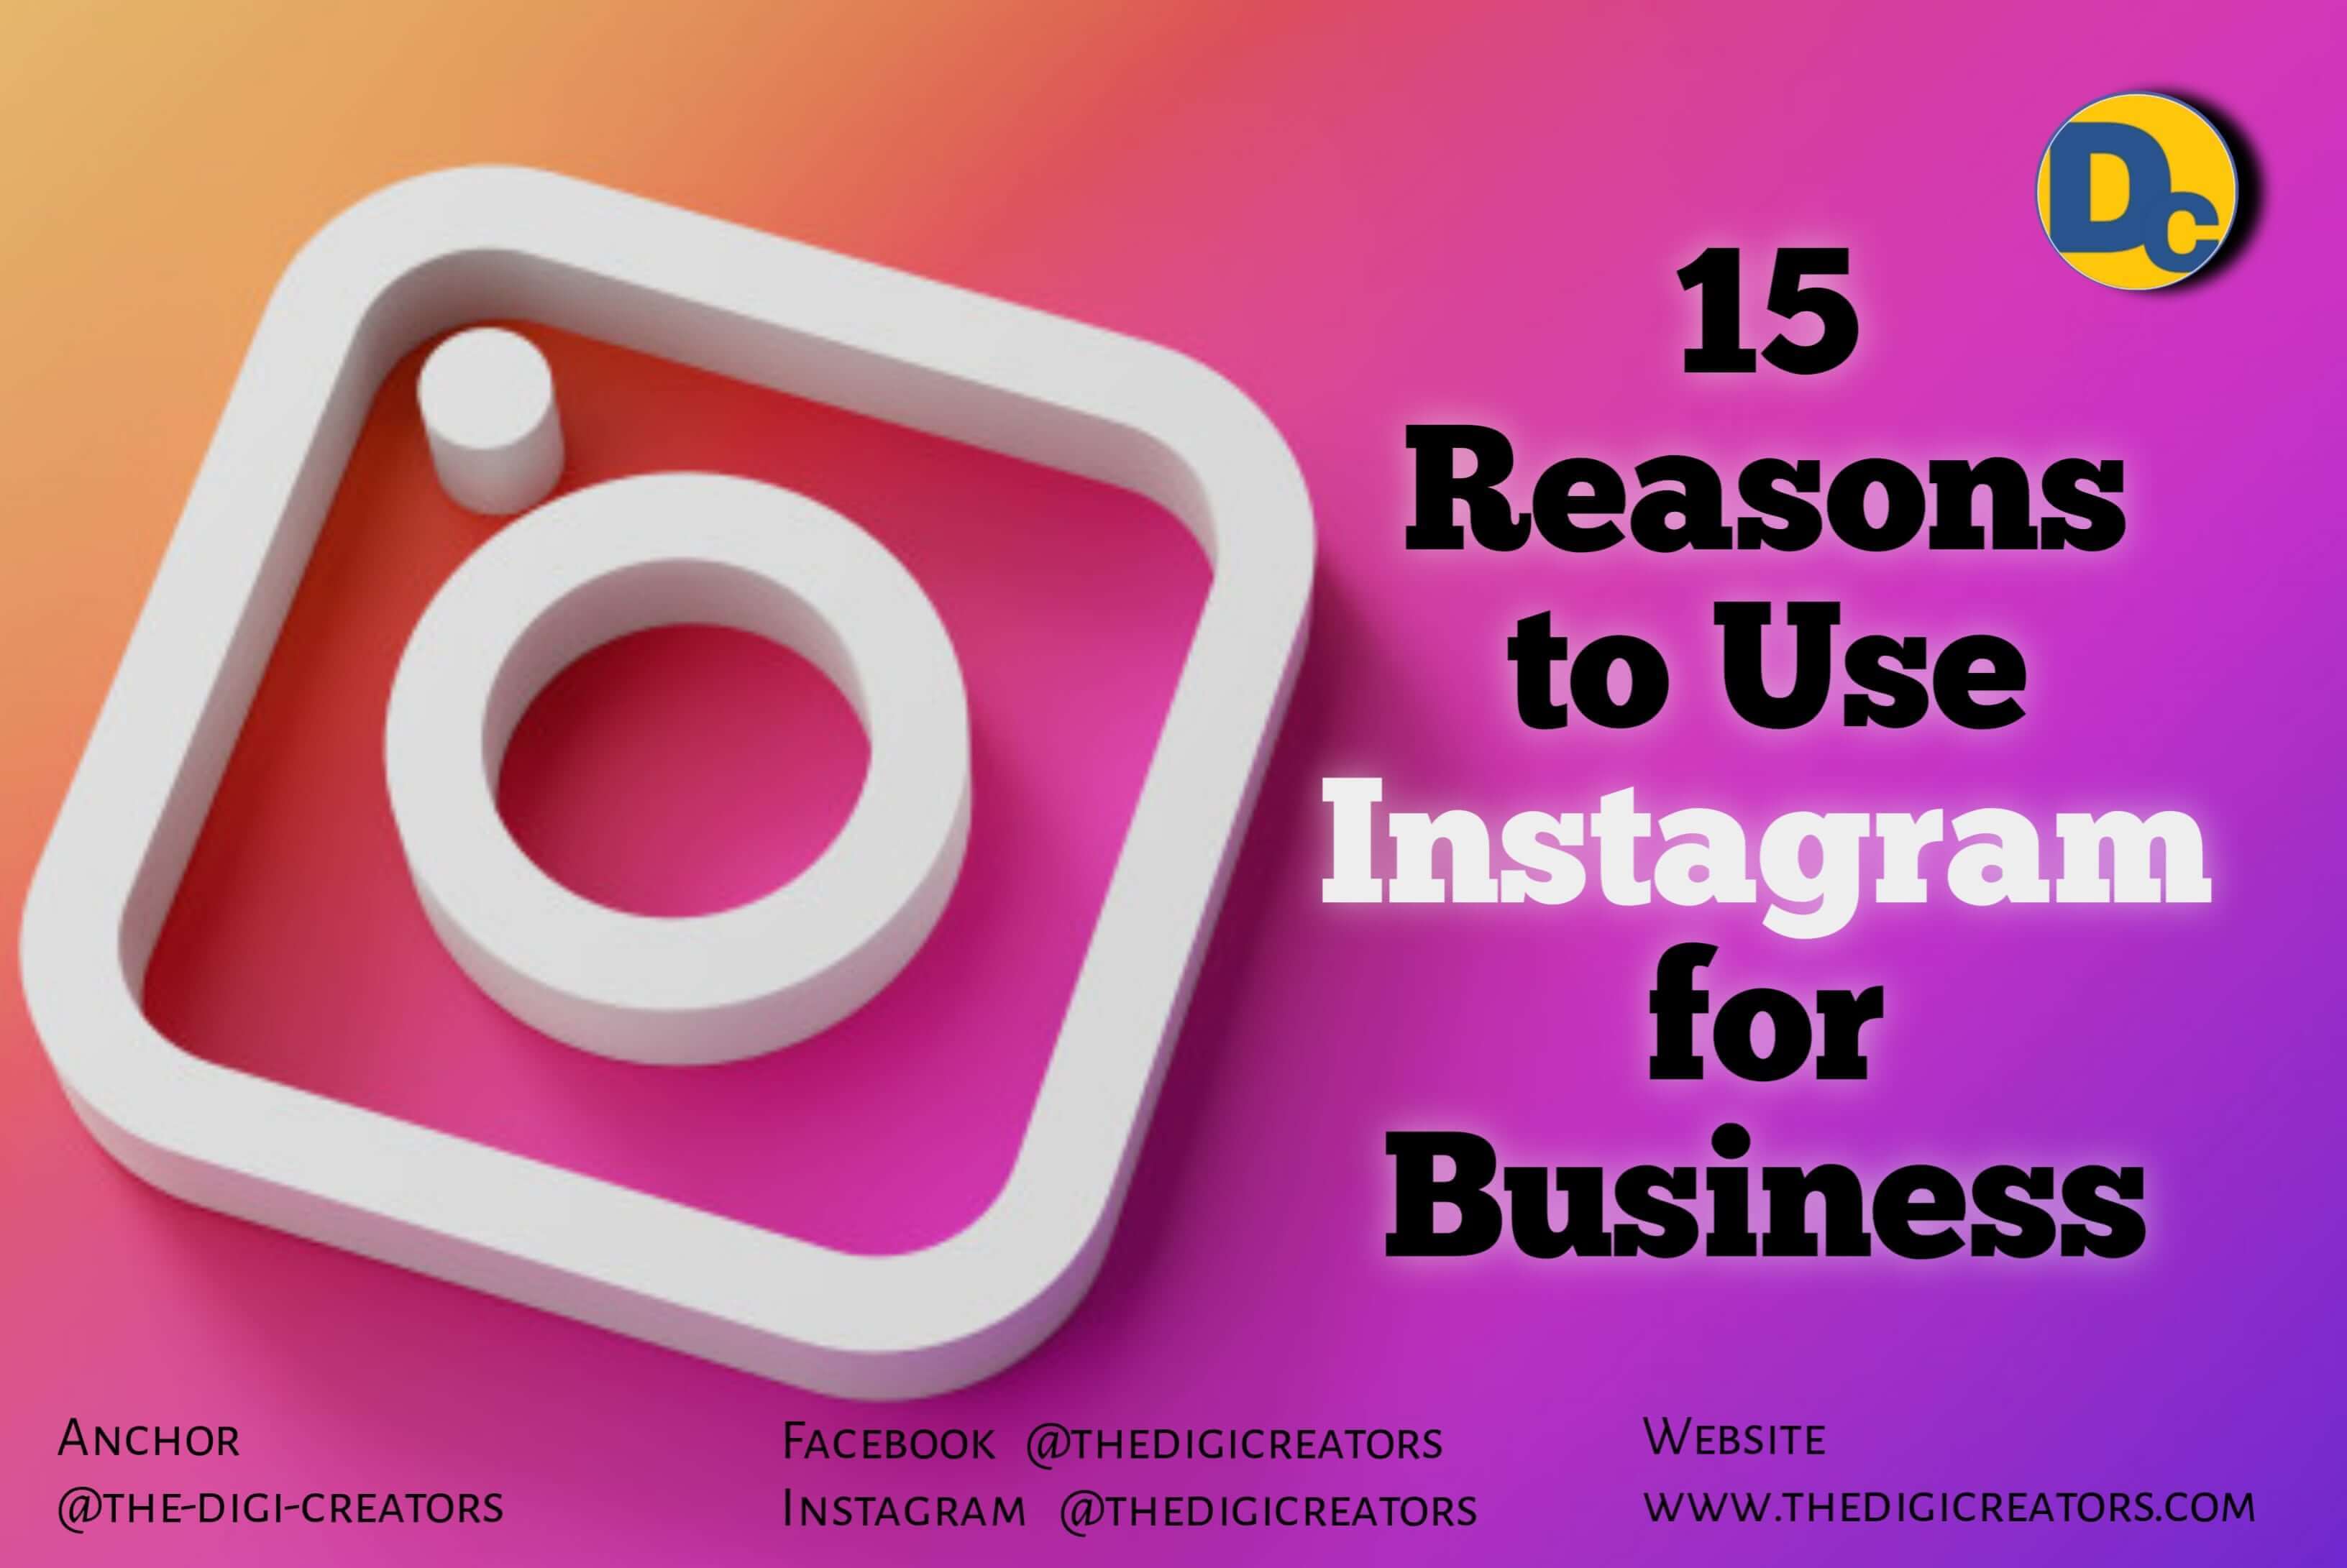 15 Reasons To Use Instagram for Business